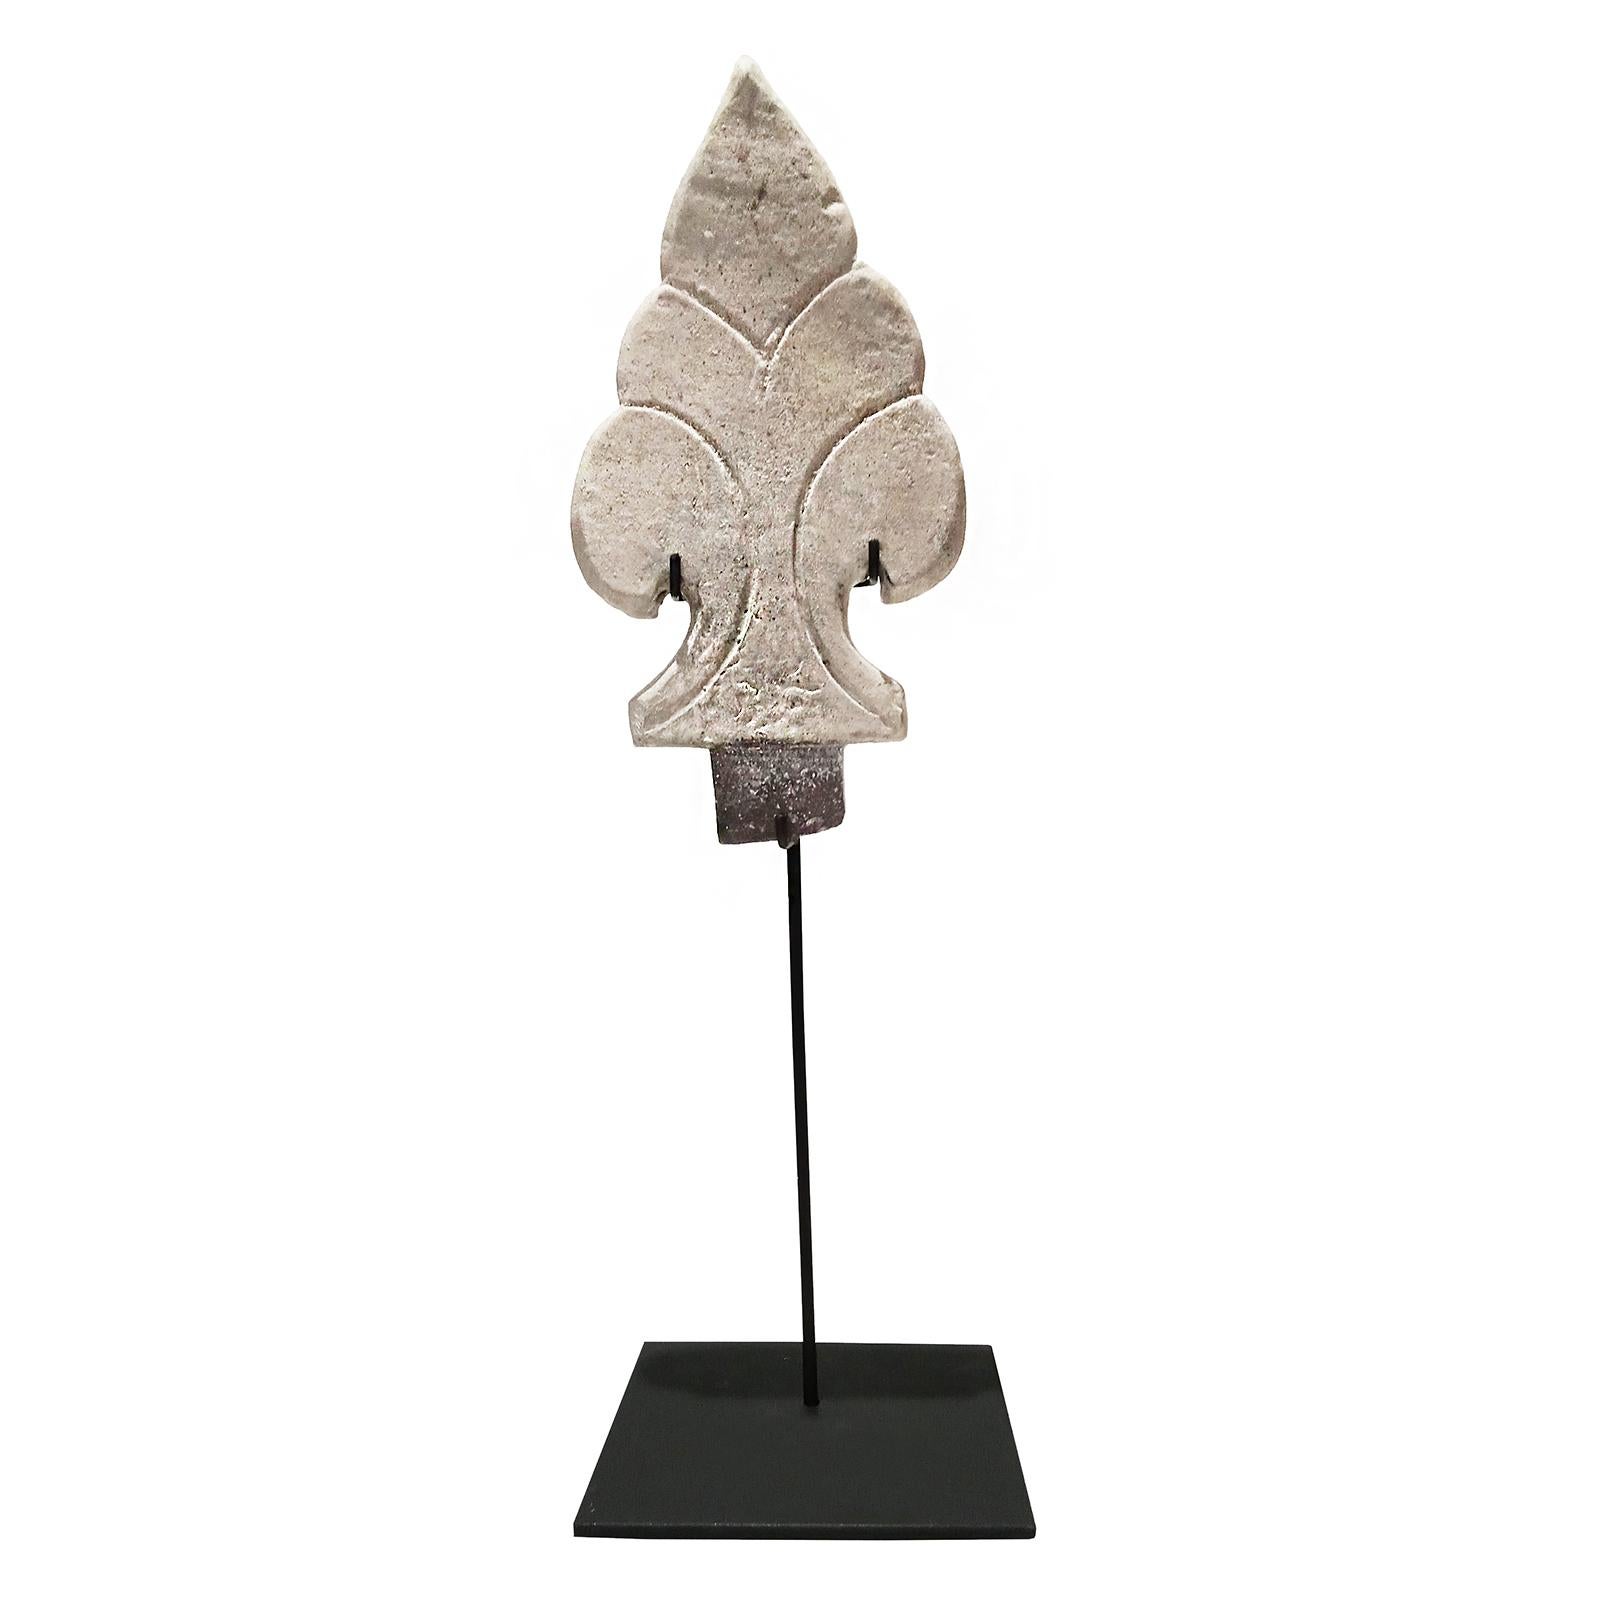 A shield-shaped antefix ornament from Thailand, late 19th century. 

Reclaimed from old constructions and preserved in time, these architectural details were and still are a decorative staple in many traditional Thai buildings, particularly temples,